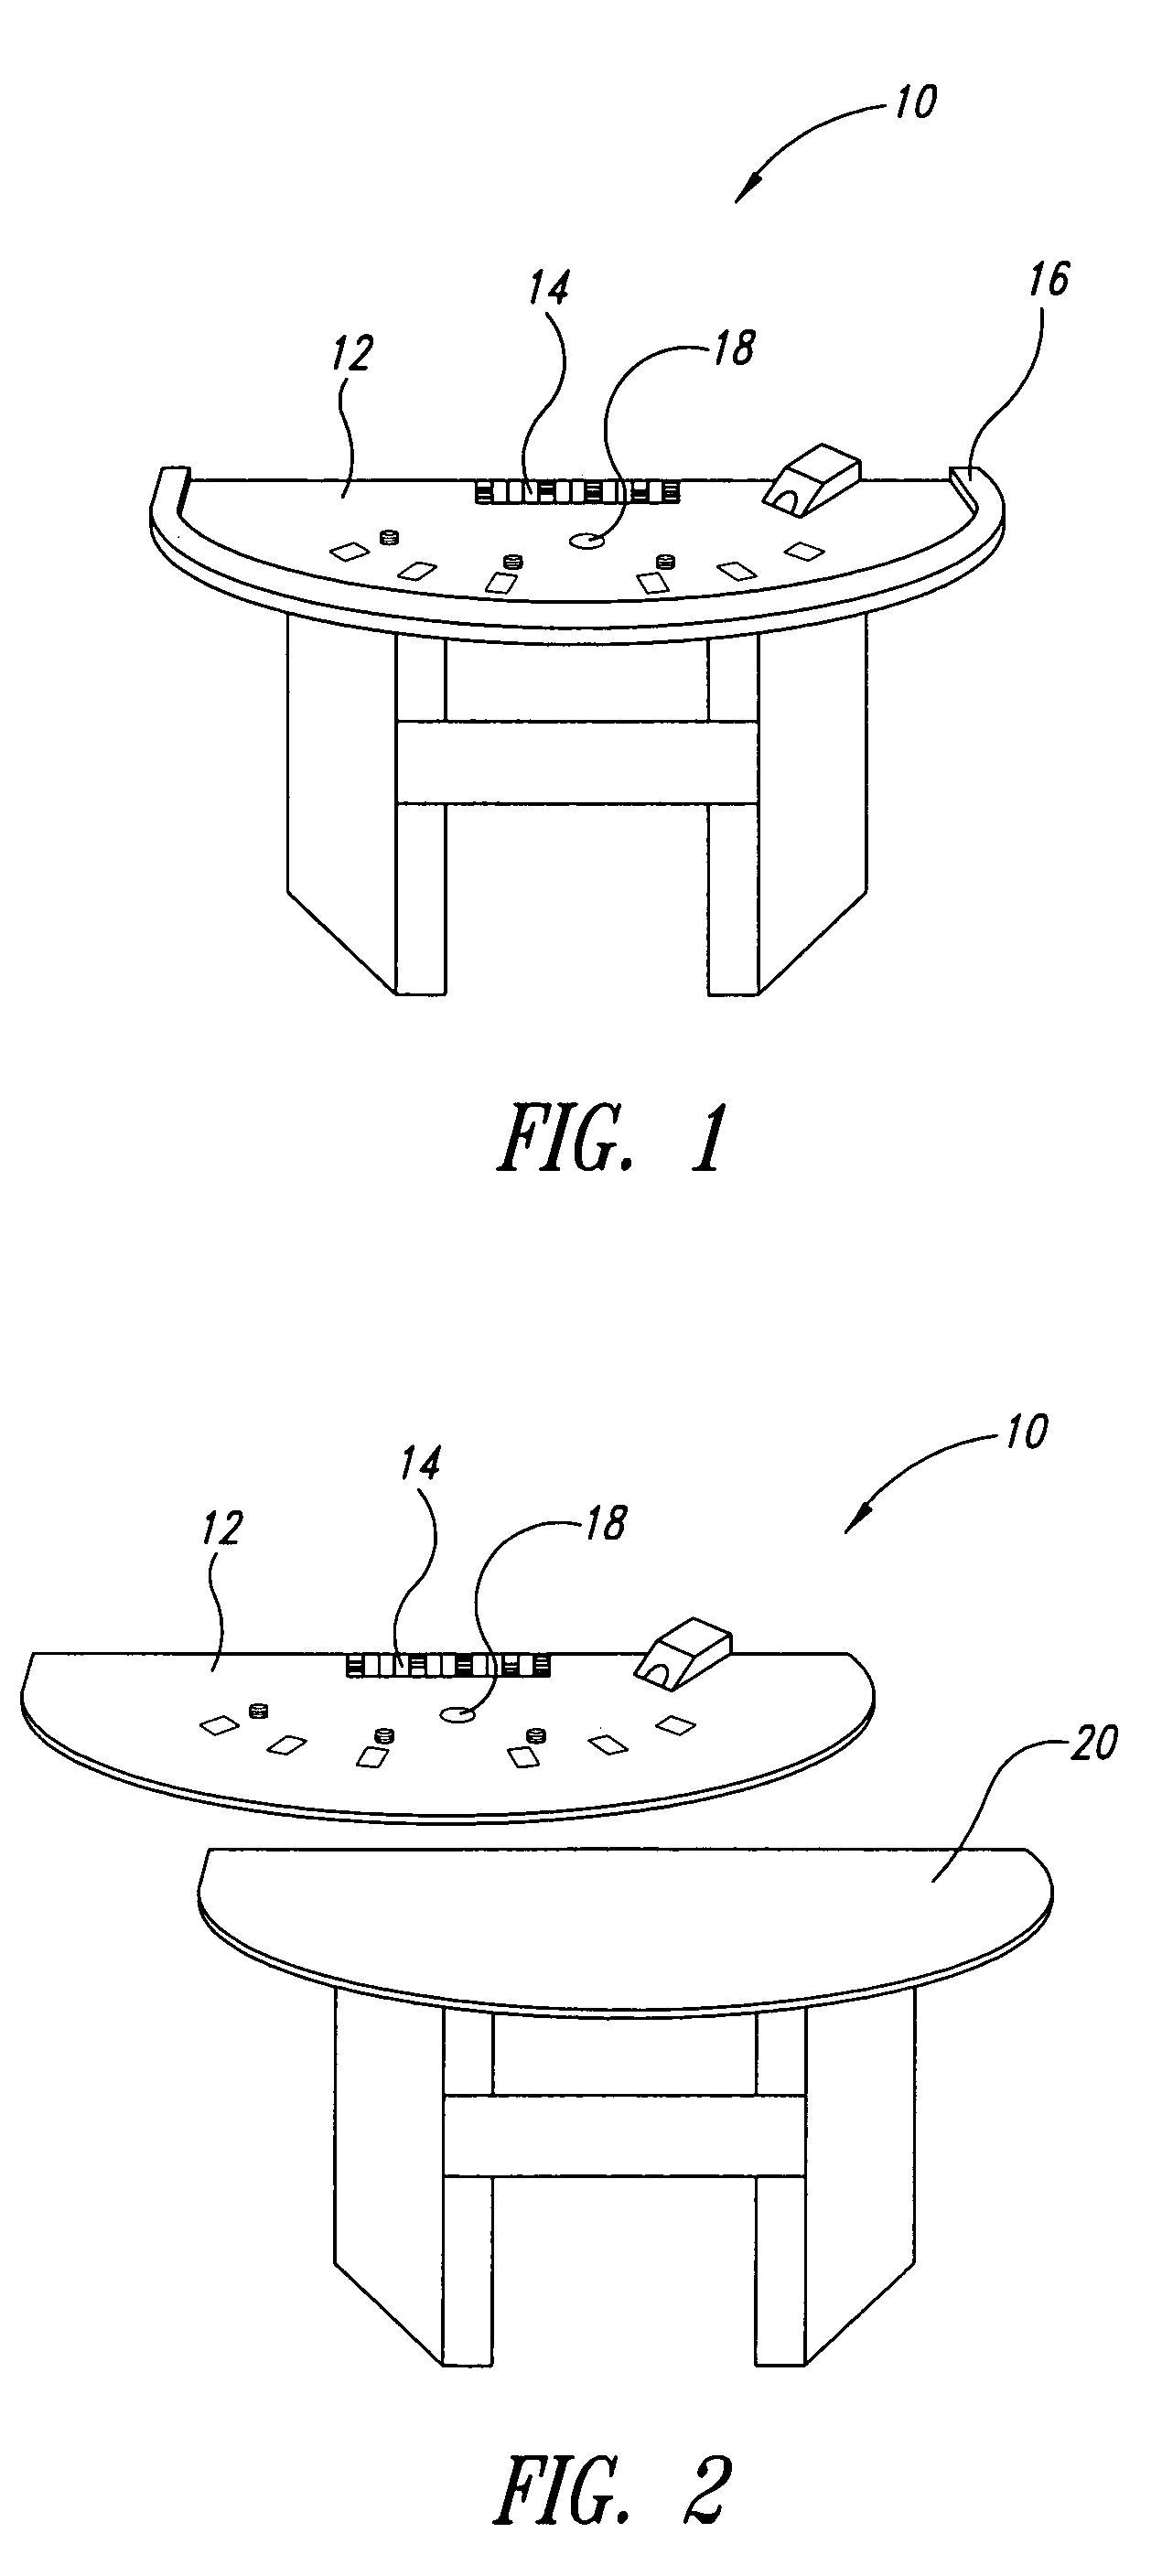 Covers for casino gaming table playing surfaces and methods of manufacturing and installing the same